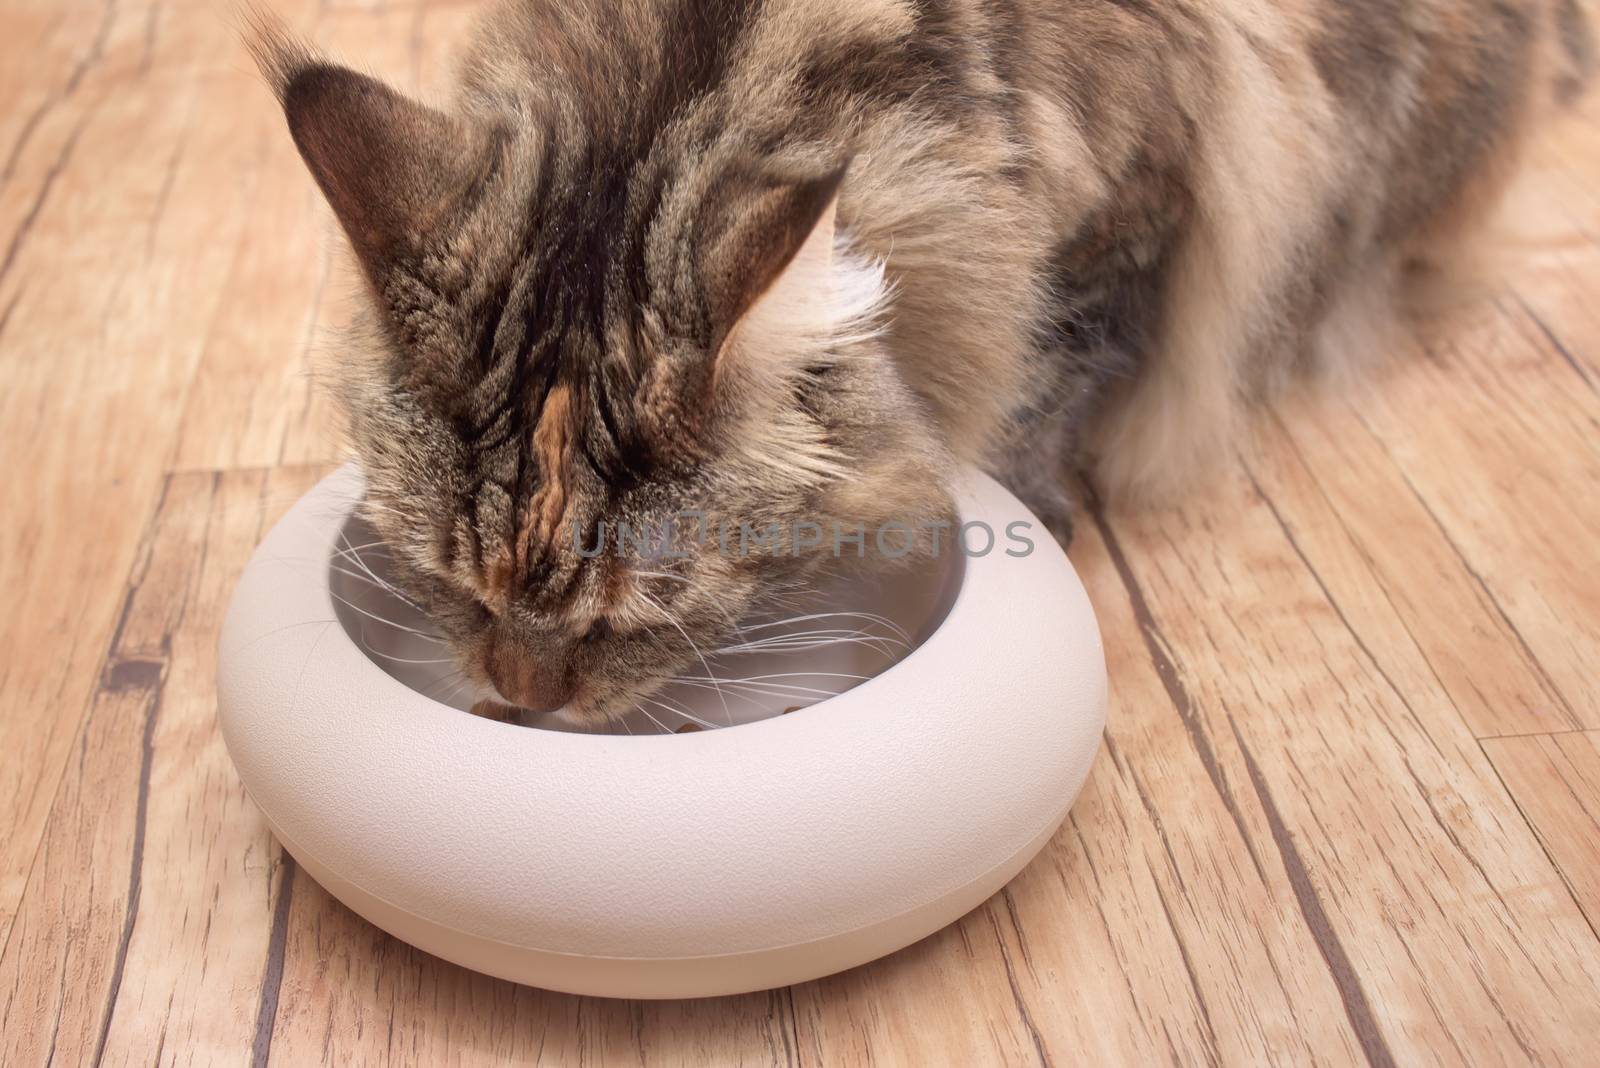 Cat eats food from bowl. Cat Maine Coon eats